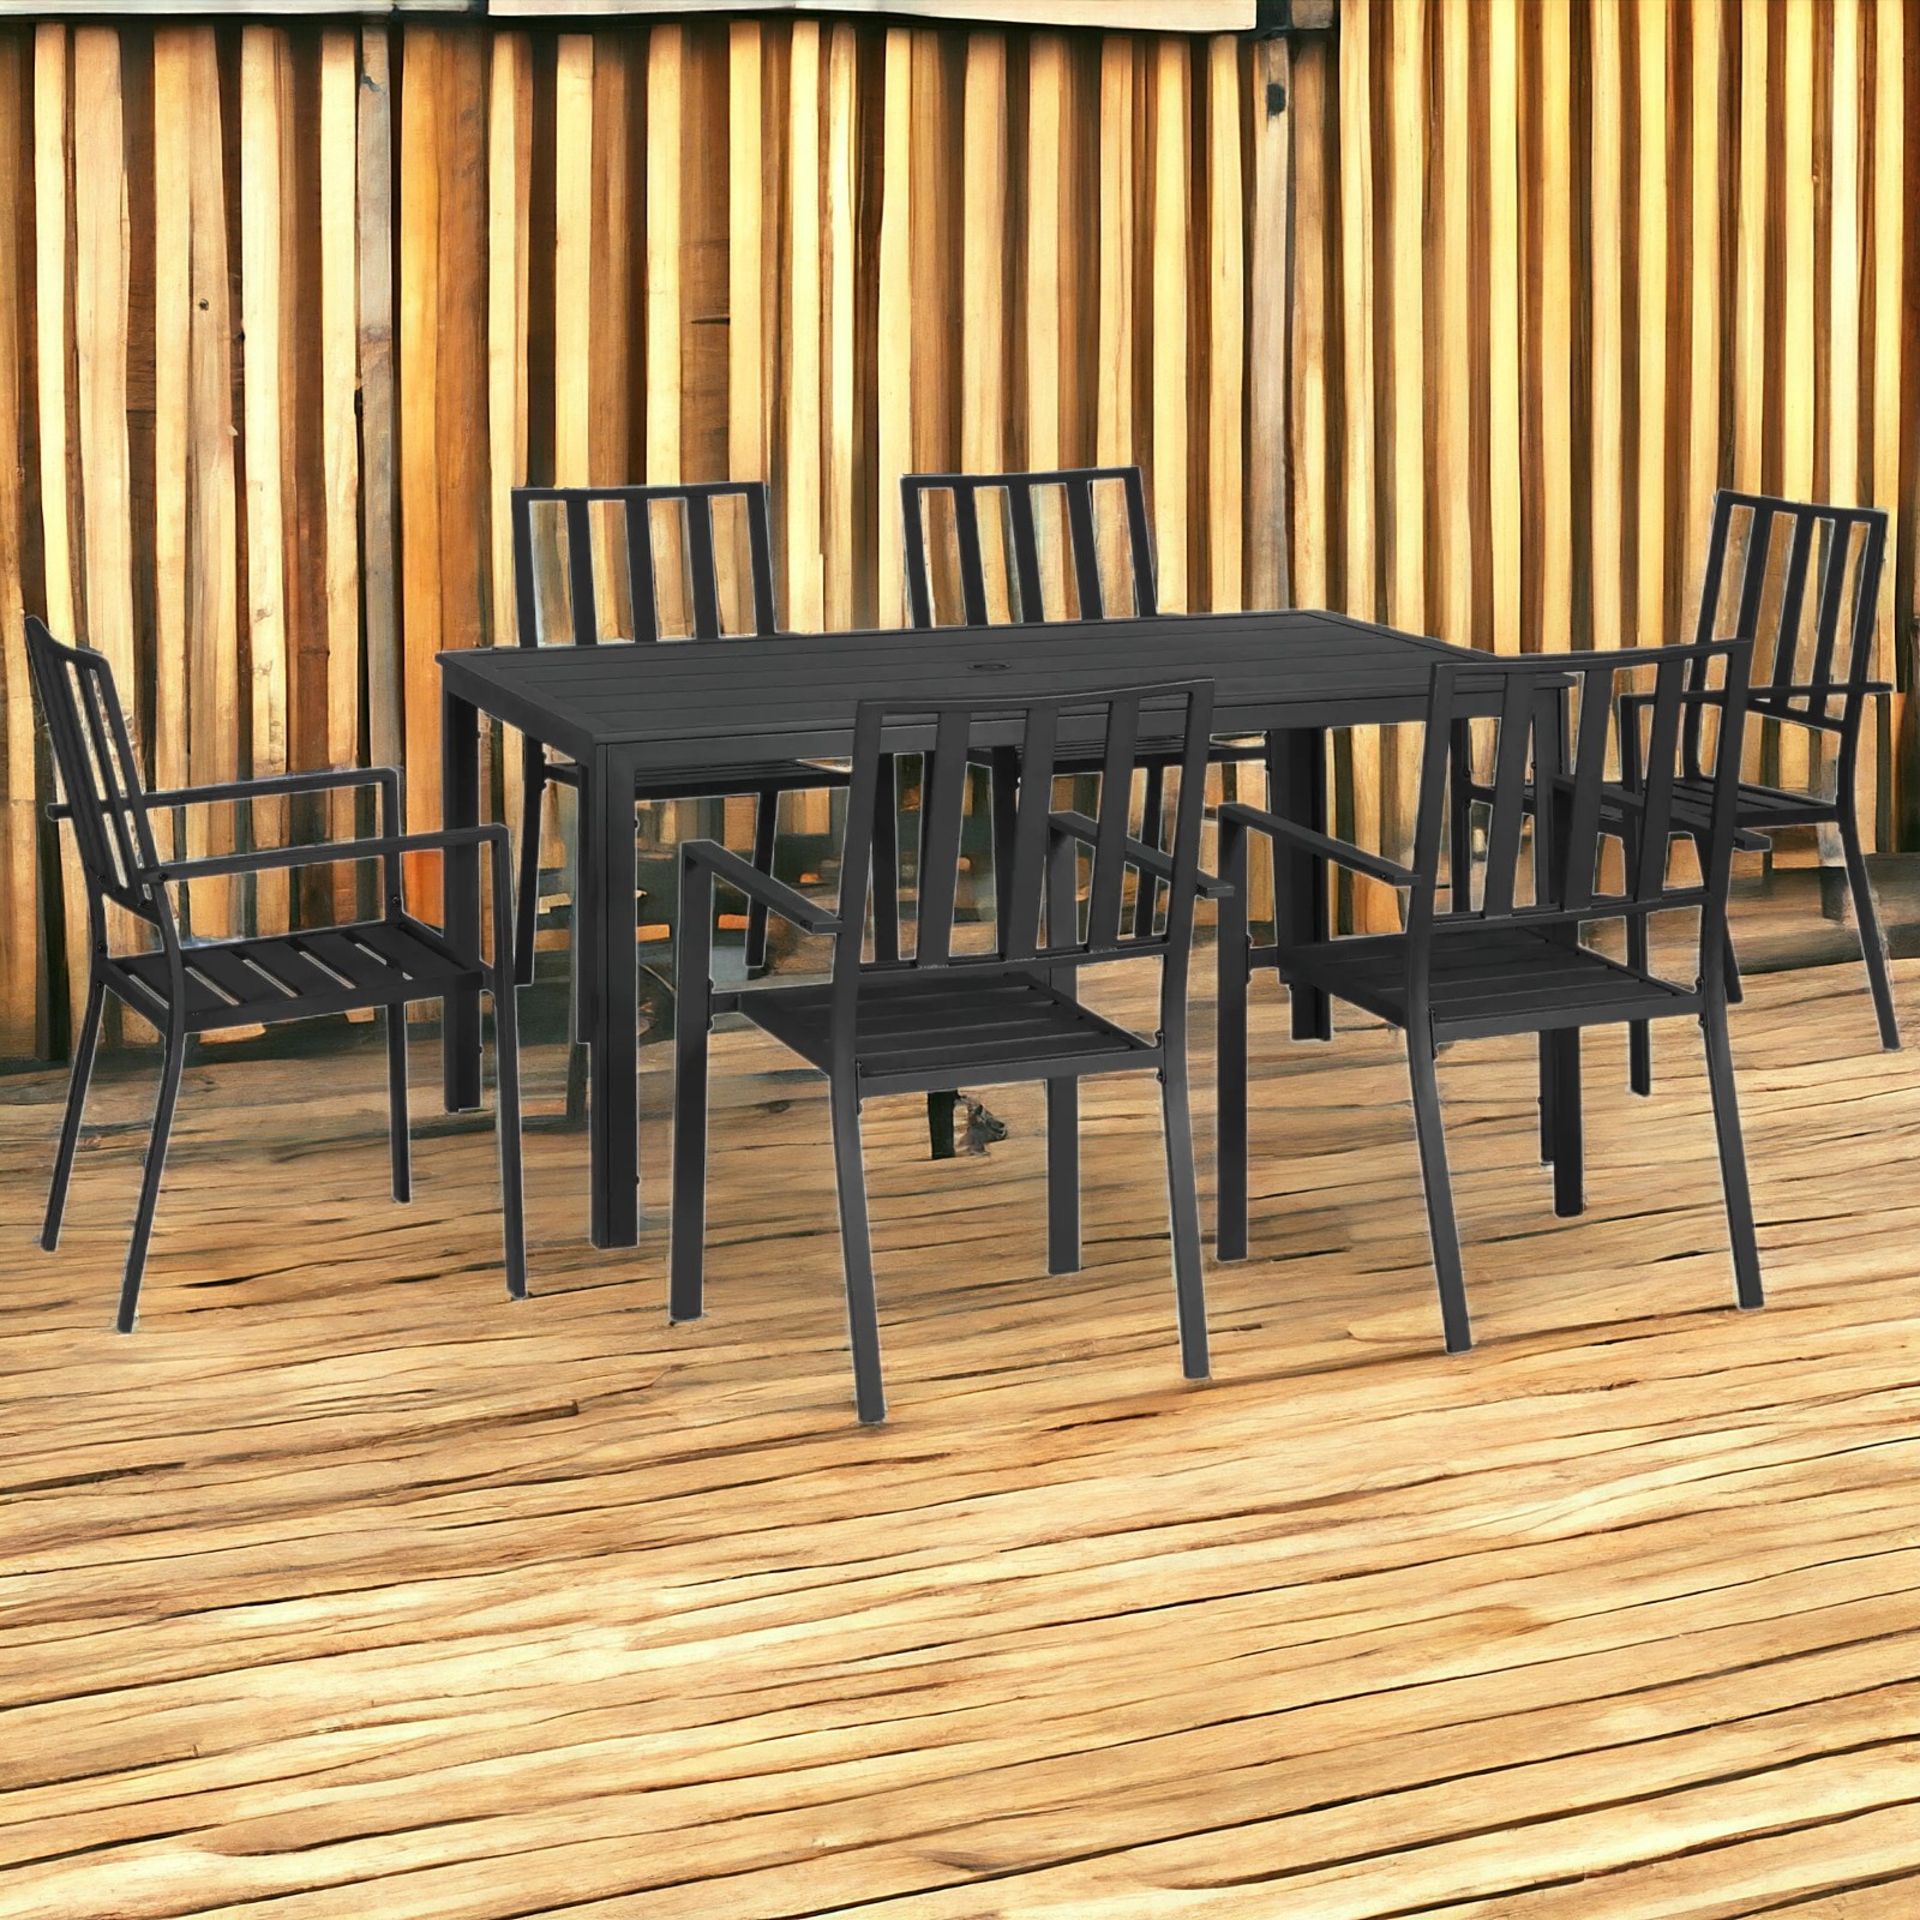 FREE DELIVERY- BRAND NEW 7 PCS GARDEN DINING SET W/ STACKABLE CHAIRS AND METAL TOP TABLE, BLACK